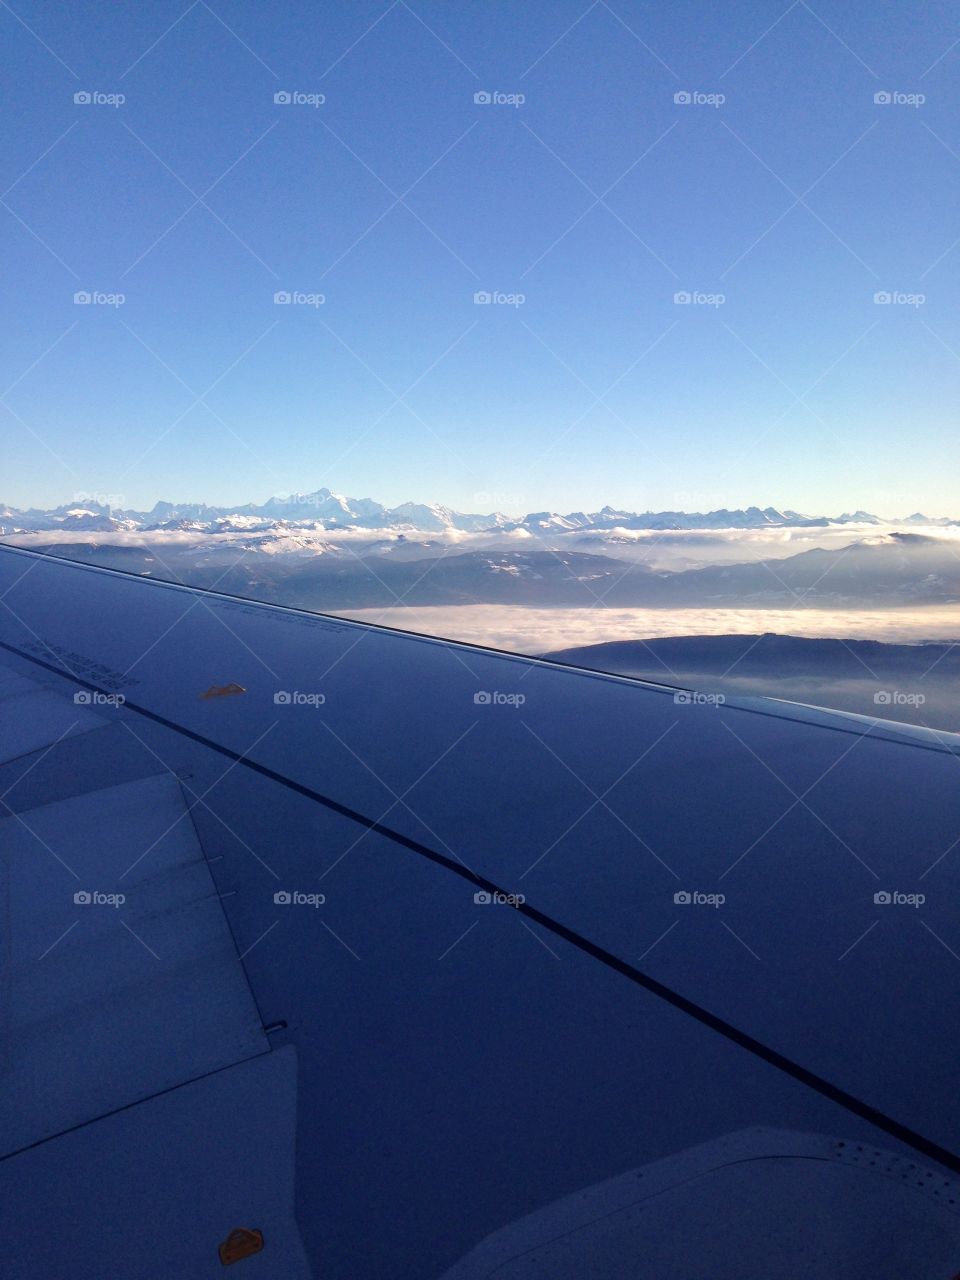 Mountains from the sky